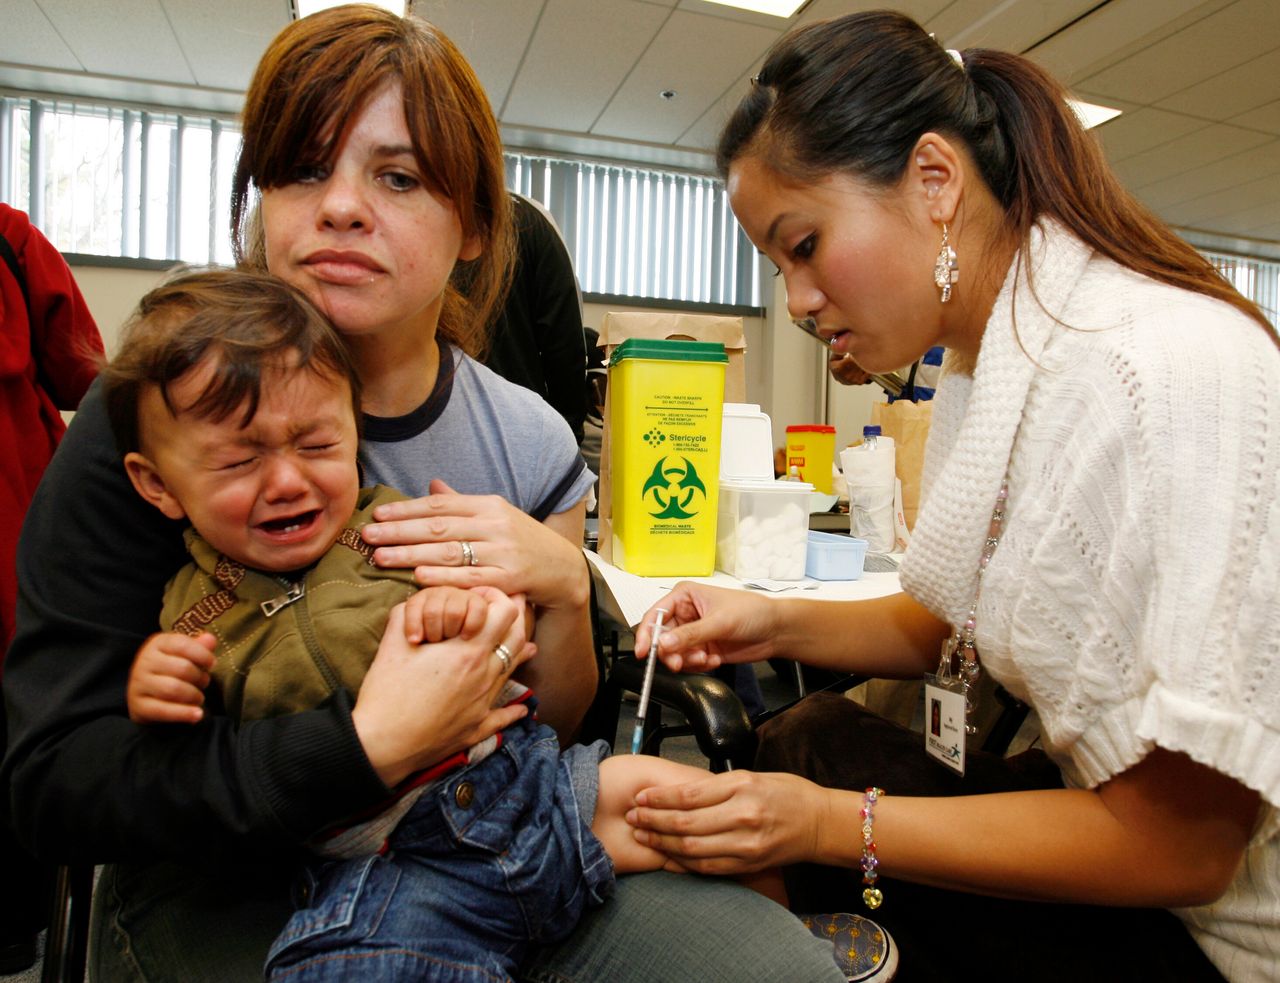 Patricia Steward holds her 11-month son Brayden as he receives his H1N1 pandemic vaccine from a nurse at the The East York Civic Centre clinic in Toronto October 29, 2009. REUTERS/Mike Cassese (CANADA HEALTH)